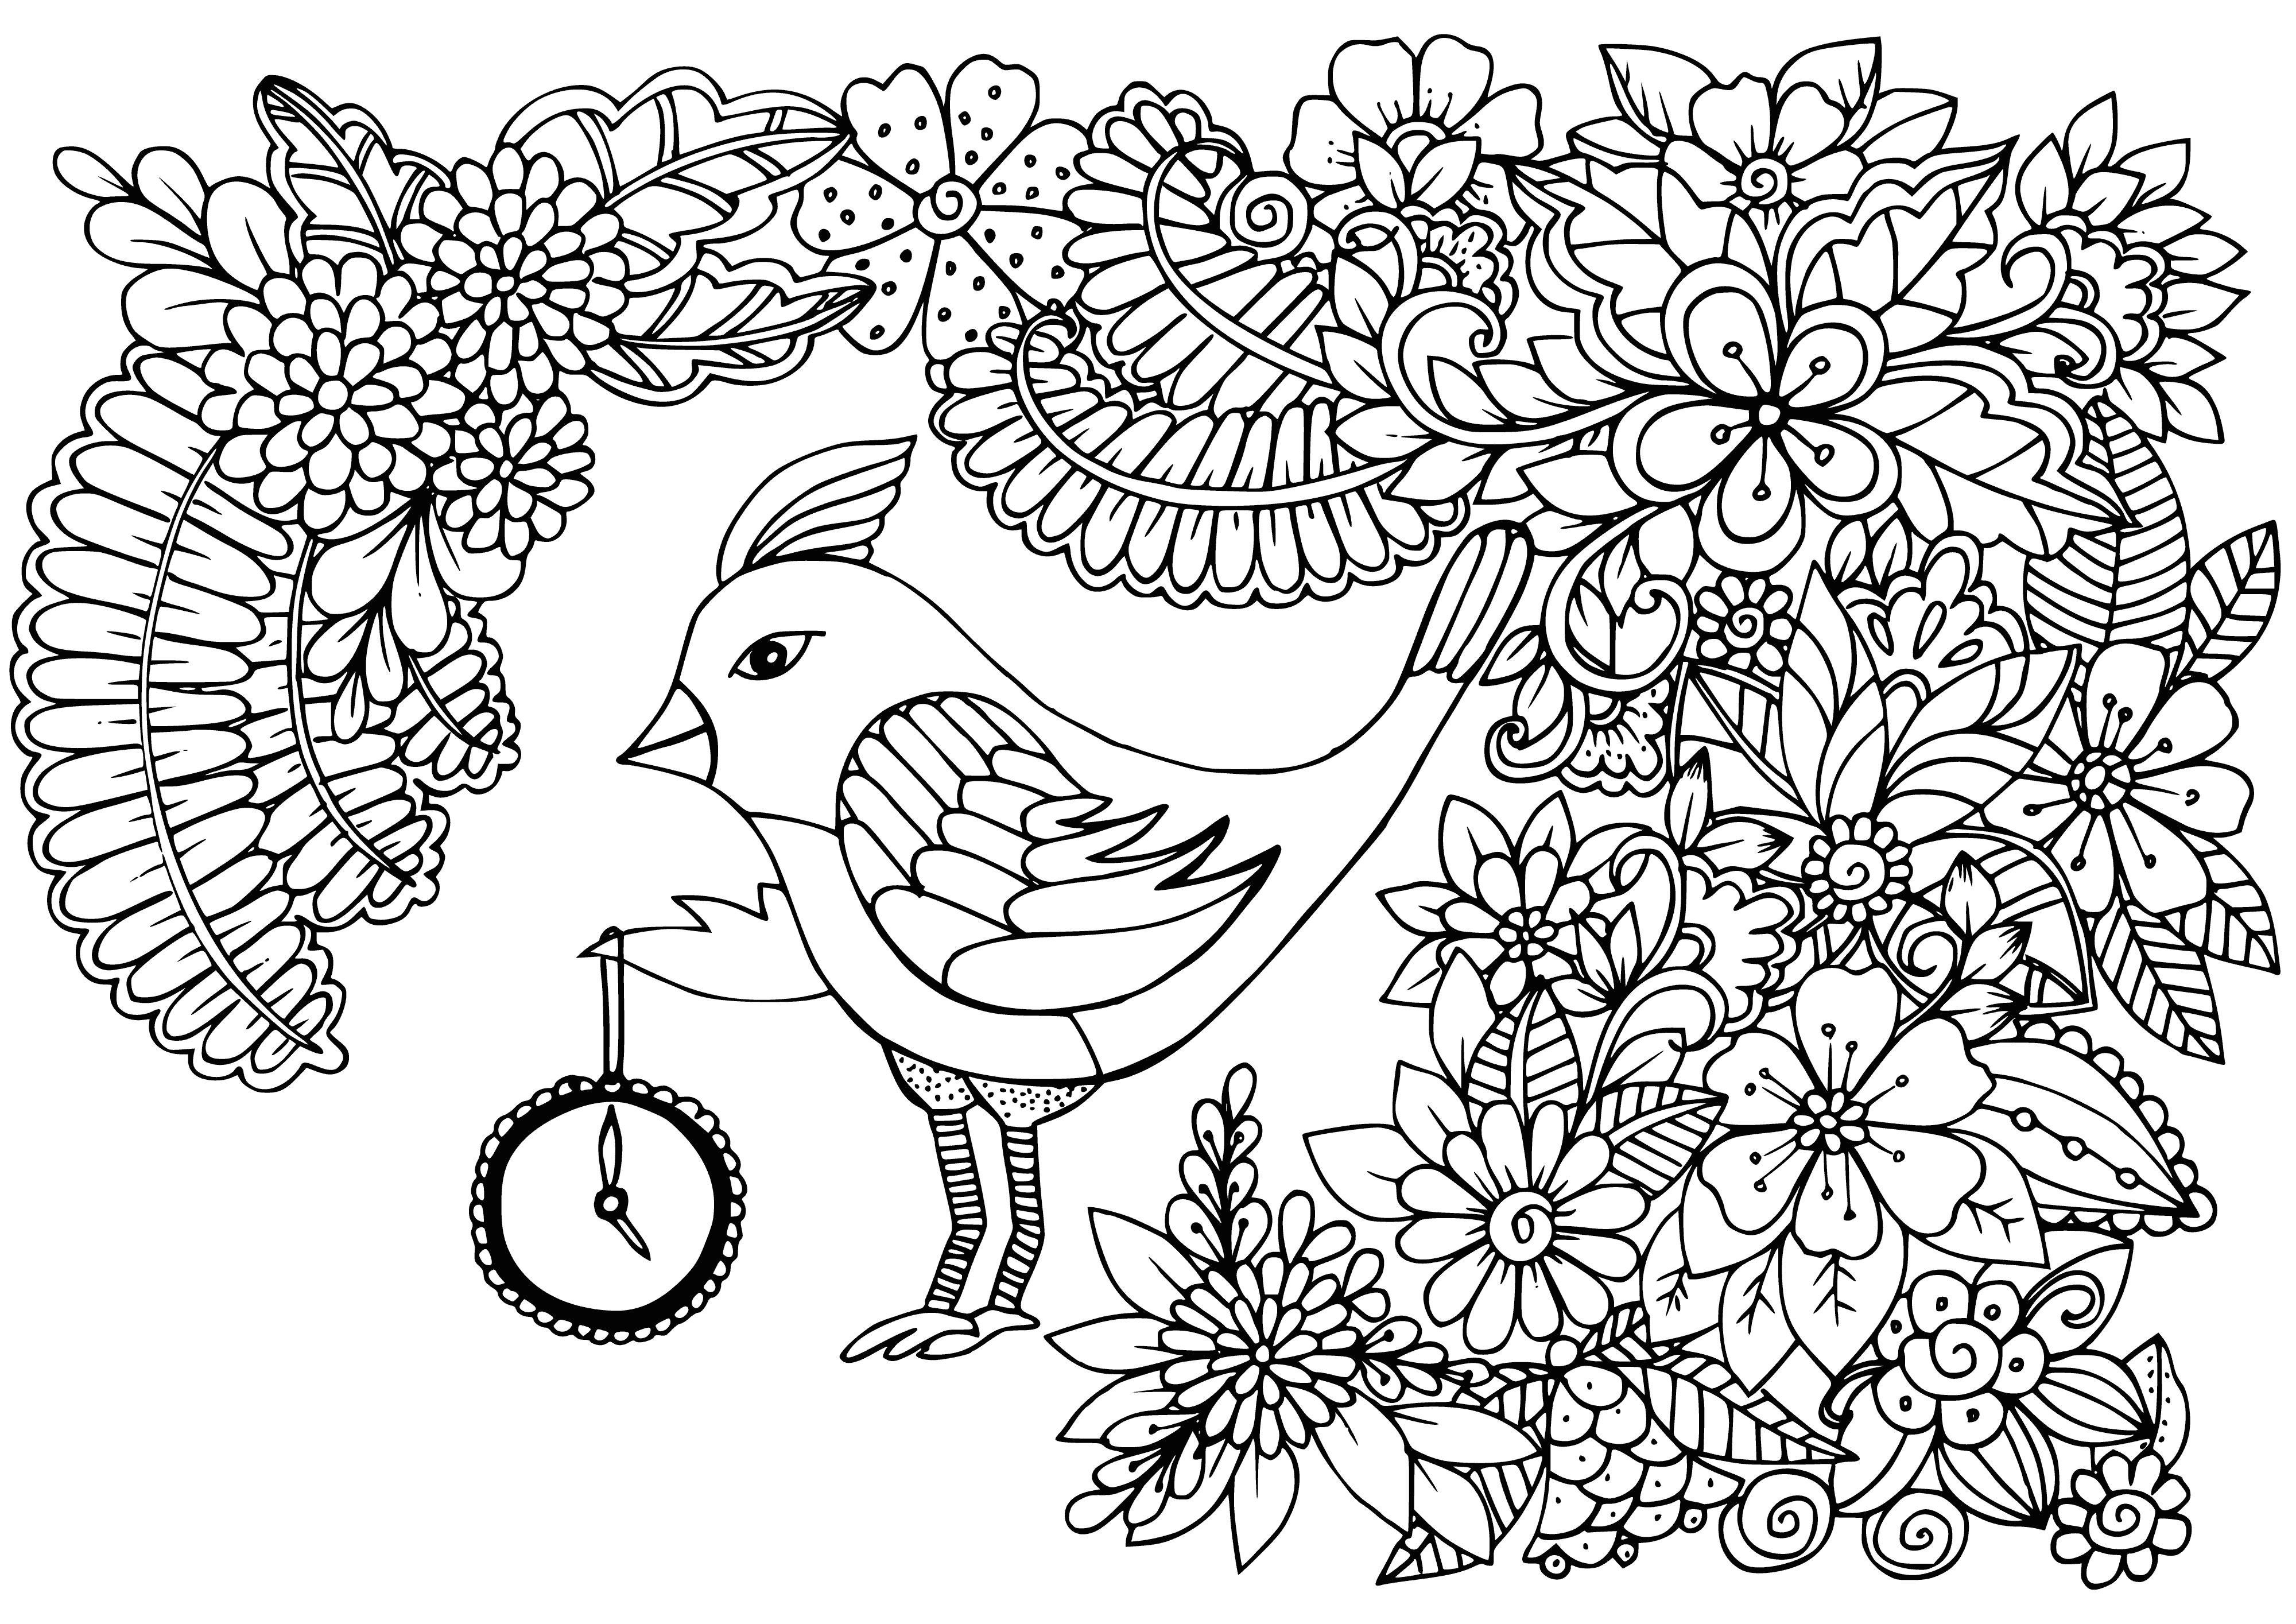 coloring page: Intricately detailed coloring page featuring various floral varieties in bloom on a blue background. Enjoyable to color! #coloringpage